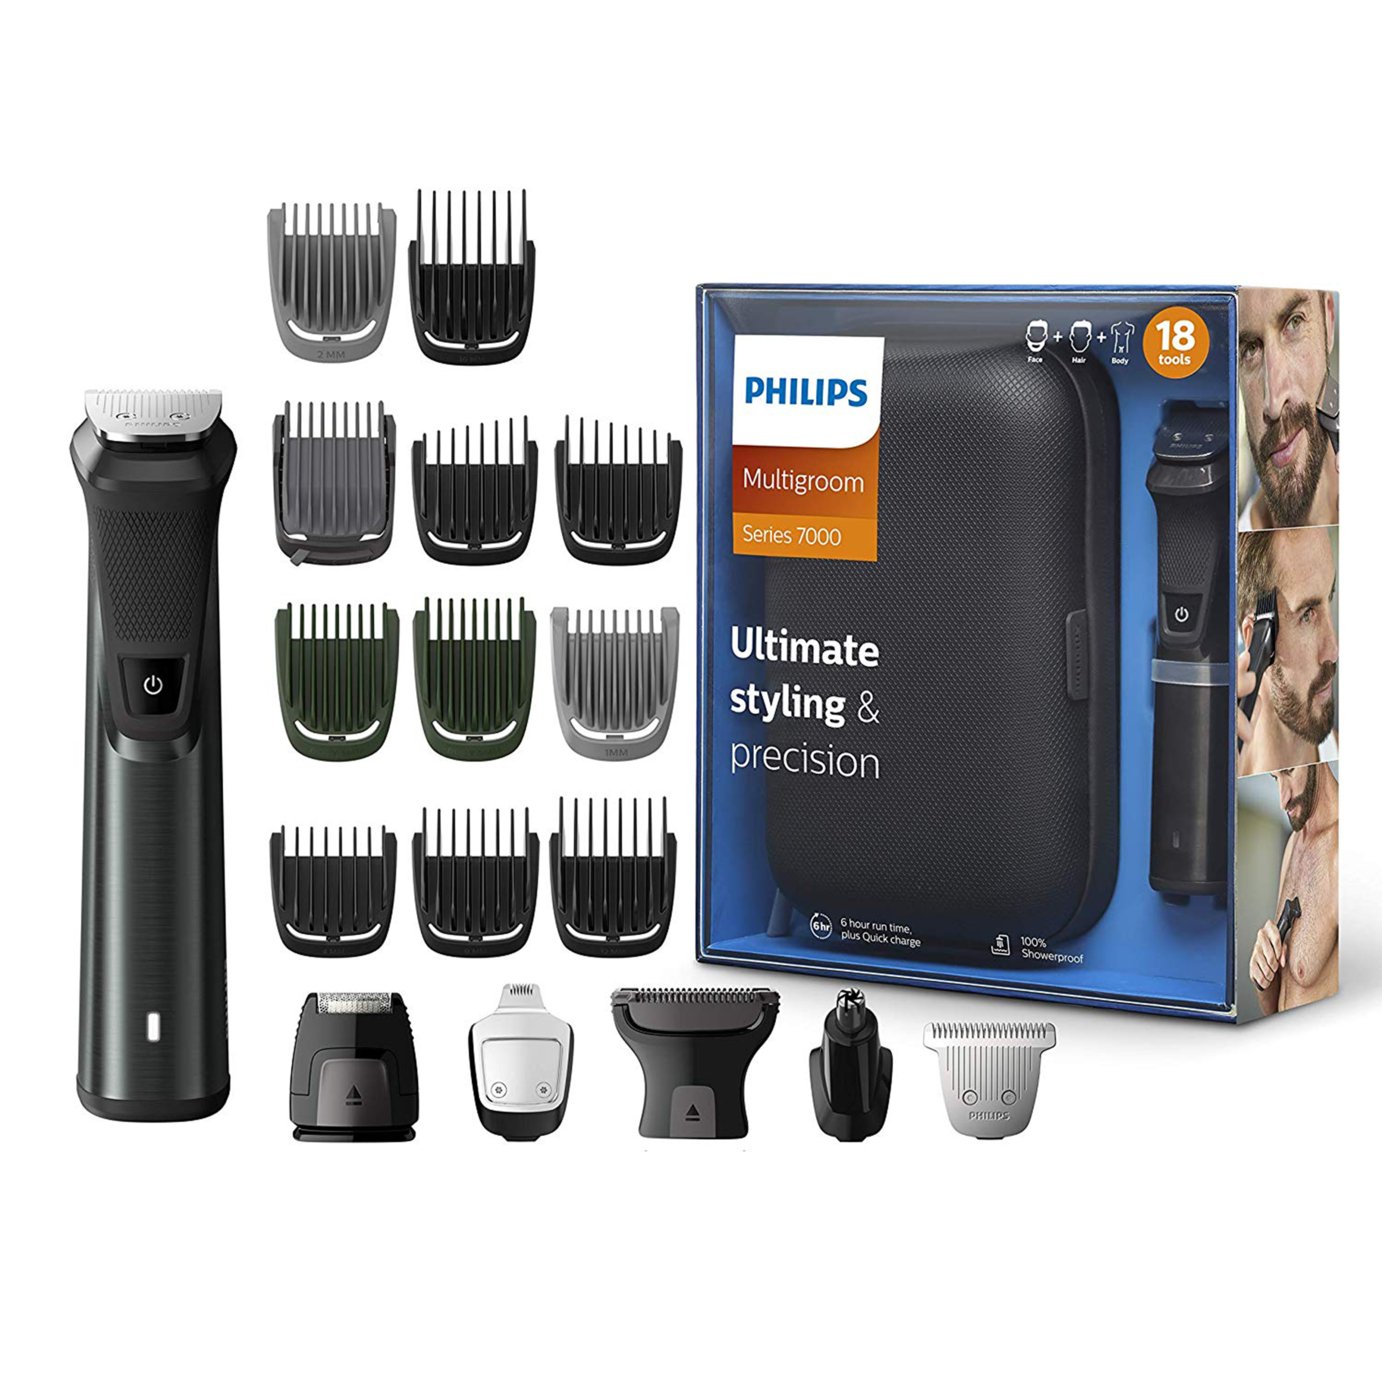 Philips 18 in 1 Beard Trimmer and Hair Clipper Kit MG7785/20